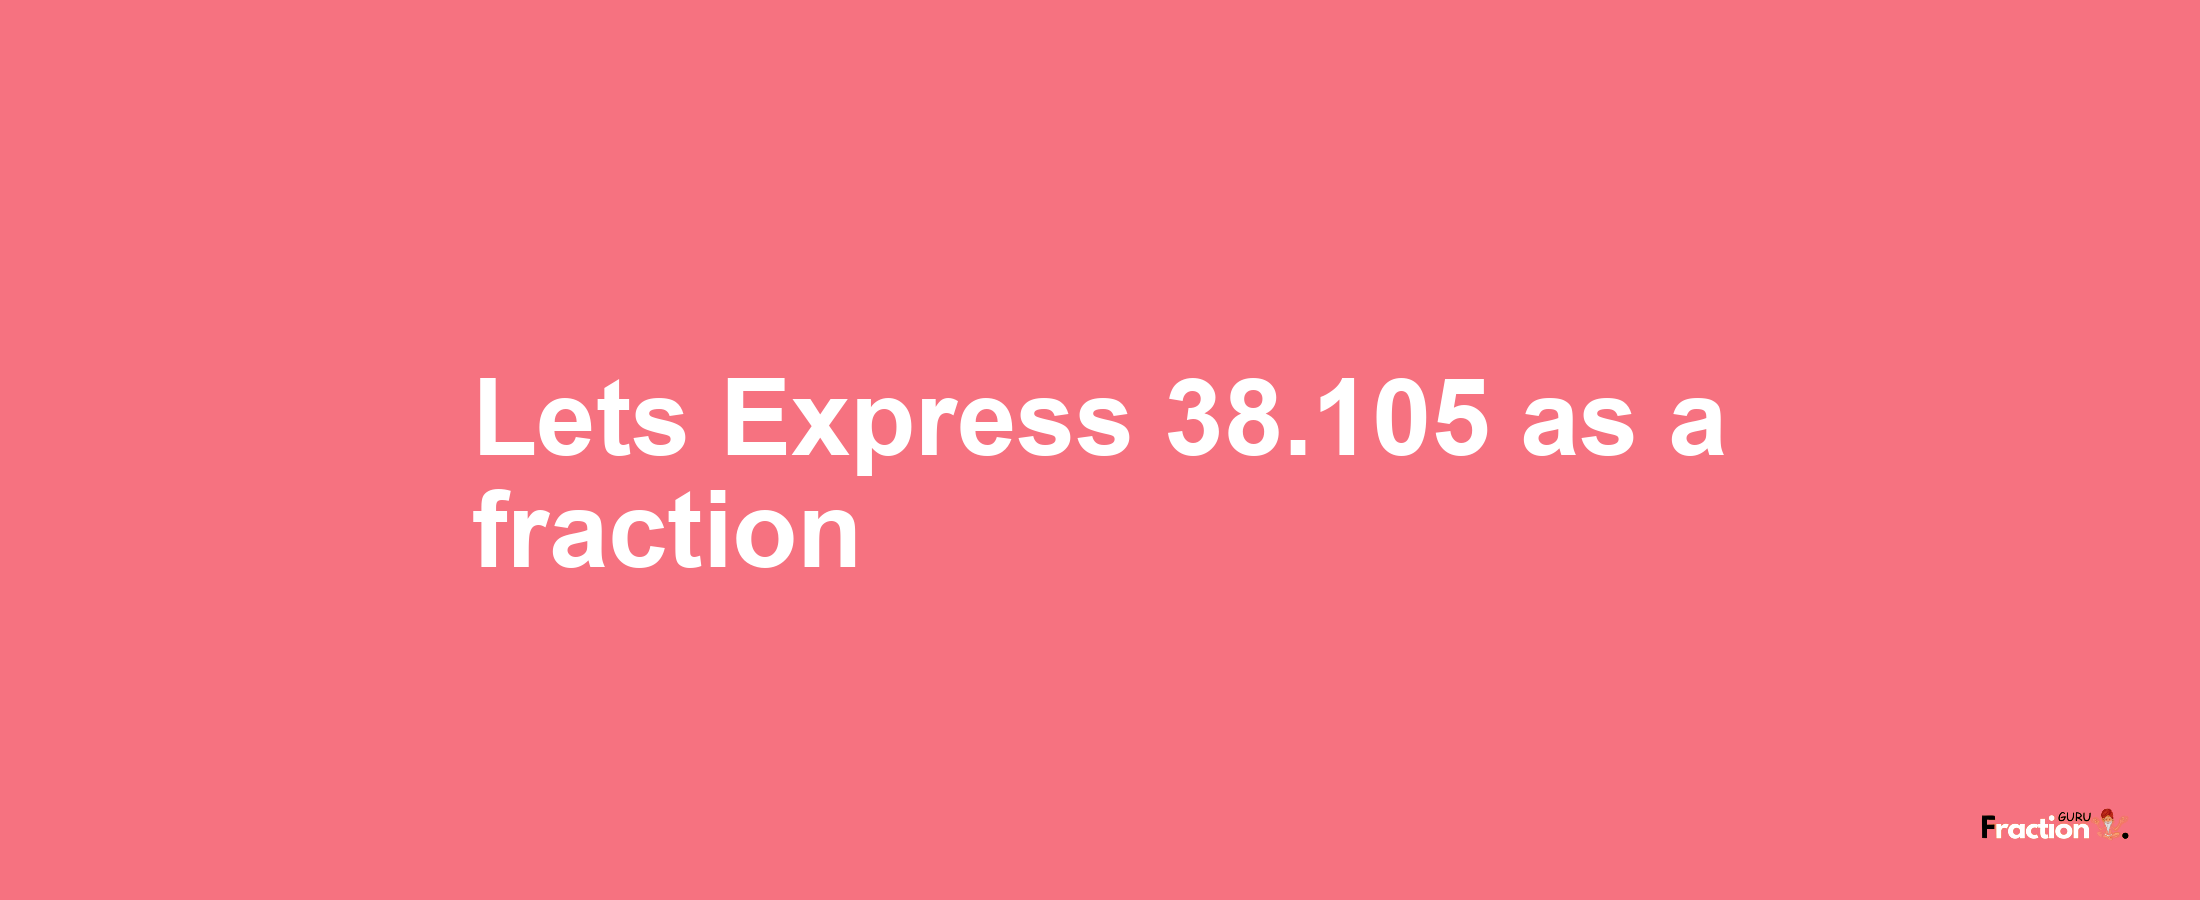 Lets Express 38.105 as afraction